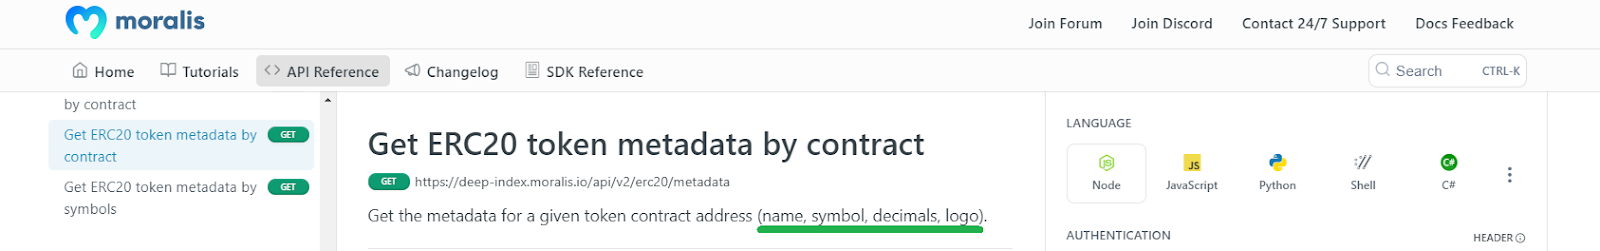 token attributes shown on a token metadata contract documentation page